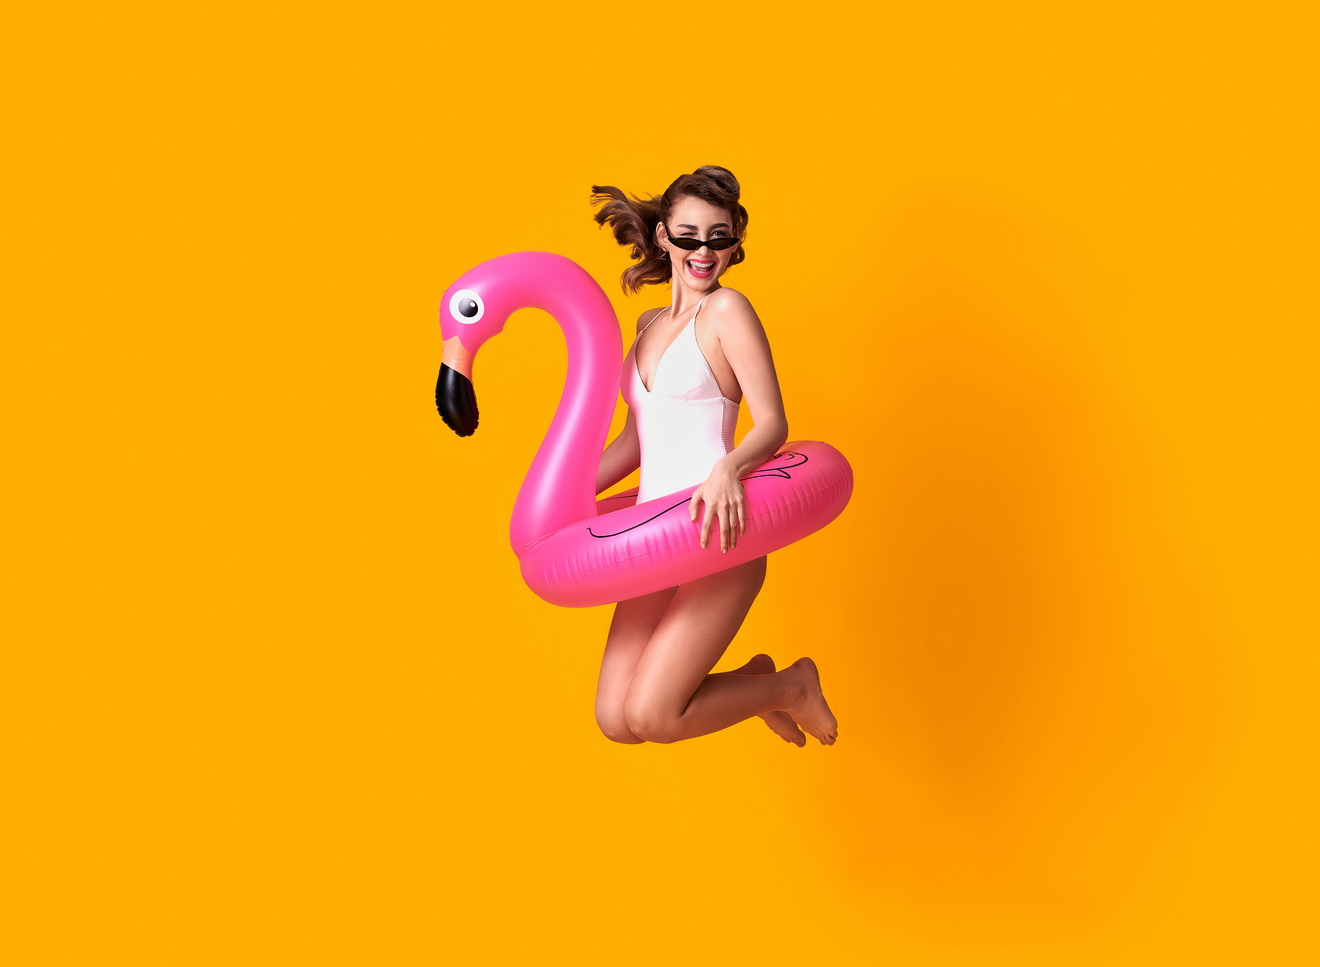 happy-young-woman-jumping-on-yellow-wall-dressed-in-swimwear-holding-flamingo-rubber-ring-beach.jpg